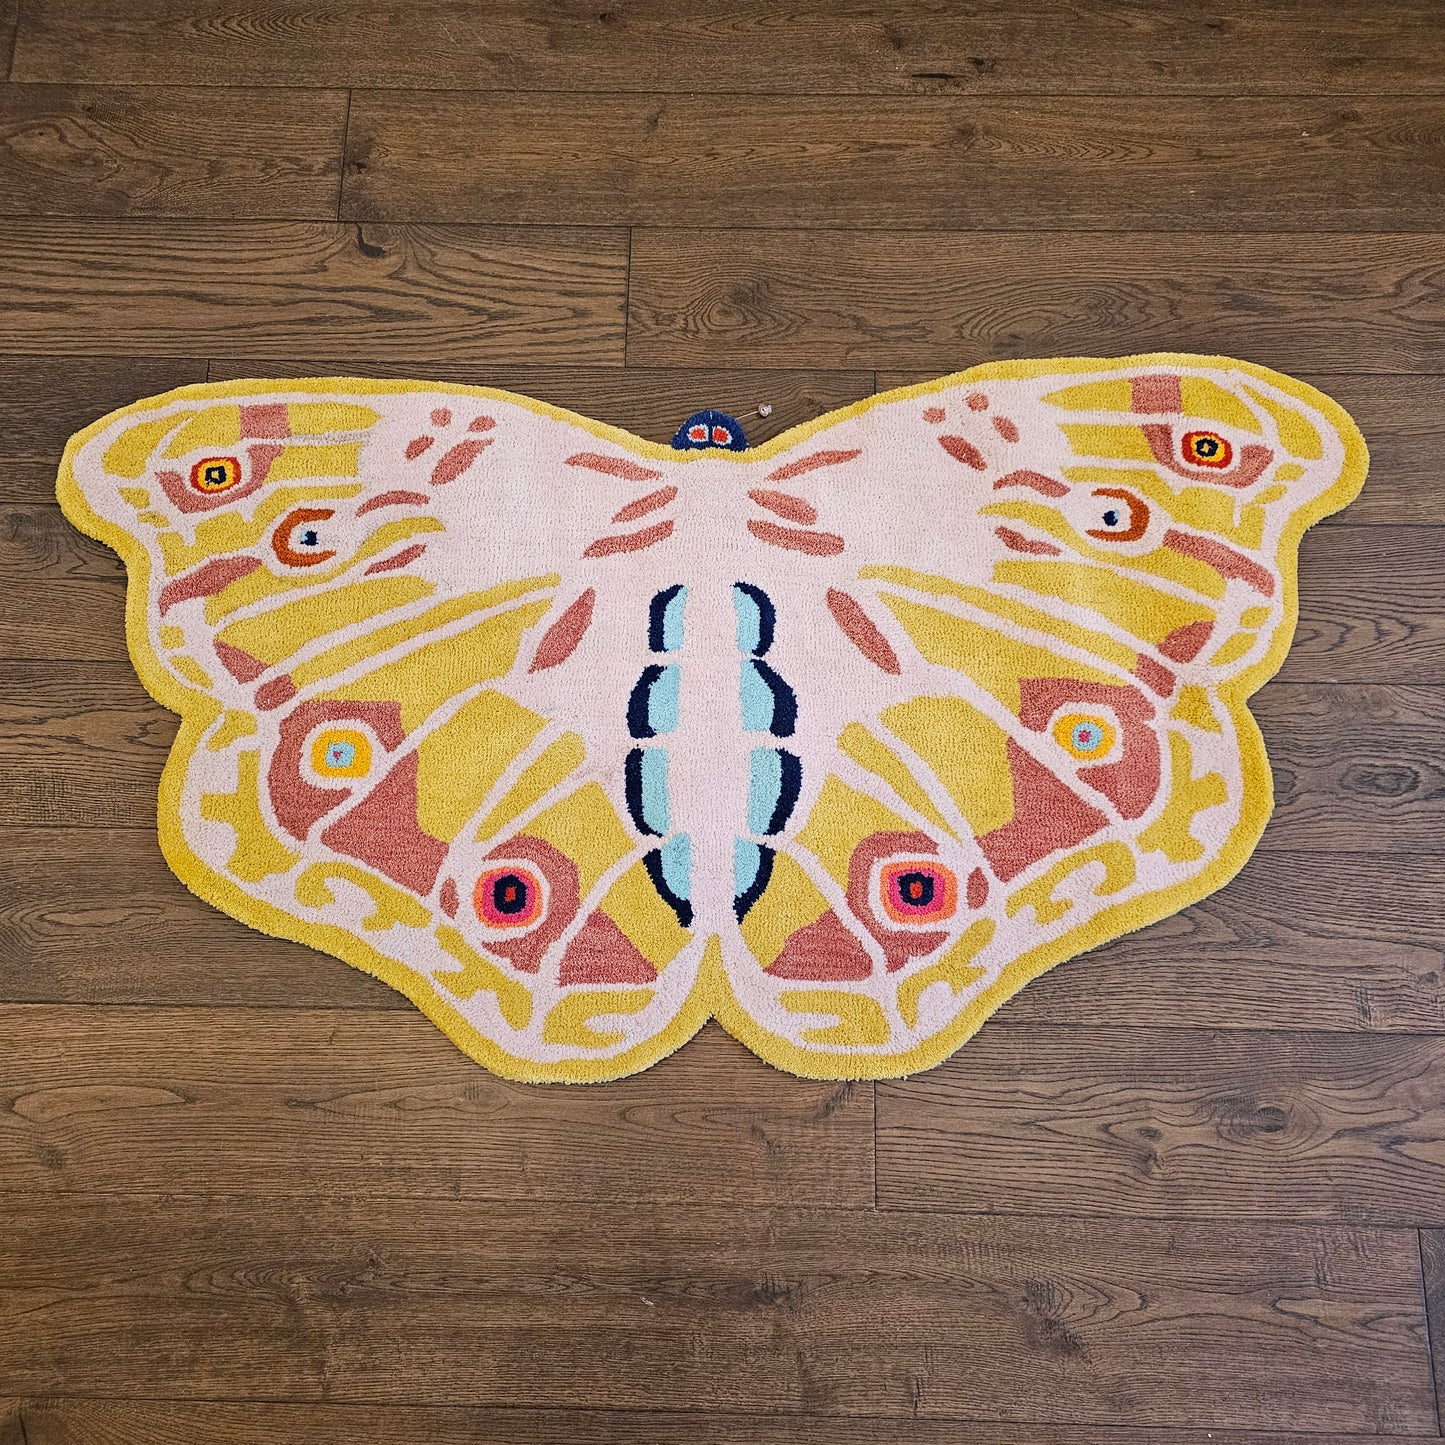 100% Wool Hand Tufted Butterfly Rug / Carpet ~ 5' x 2' 9"